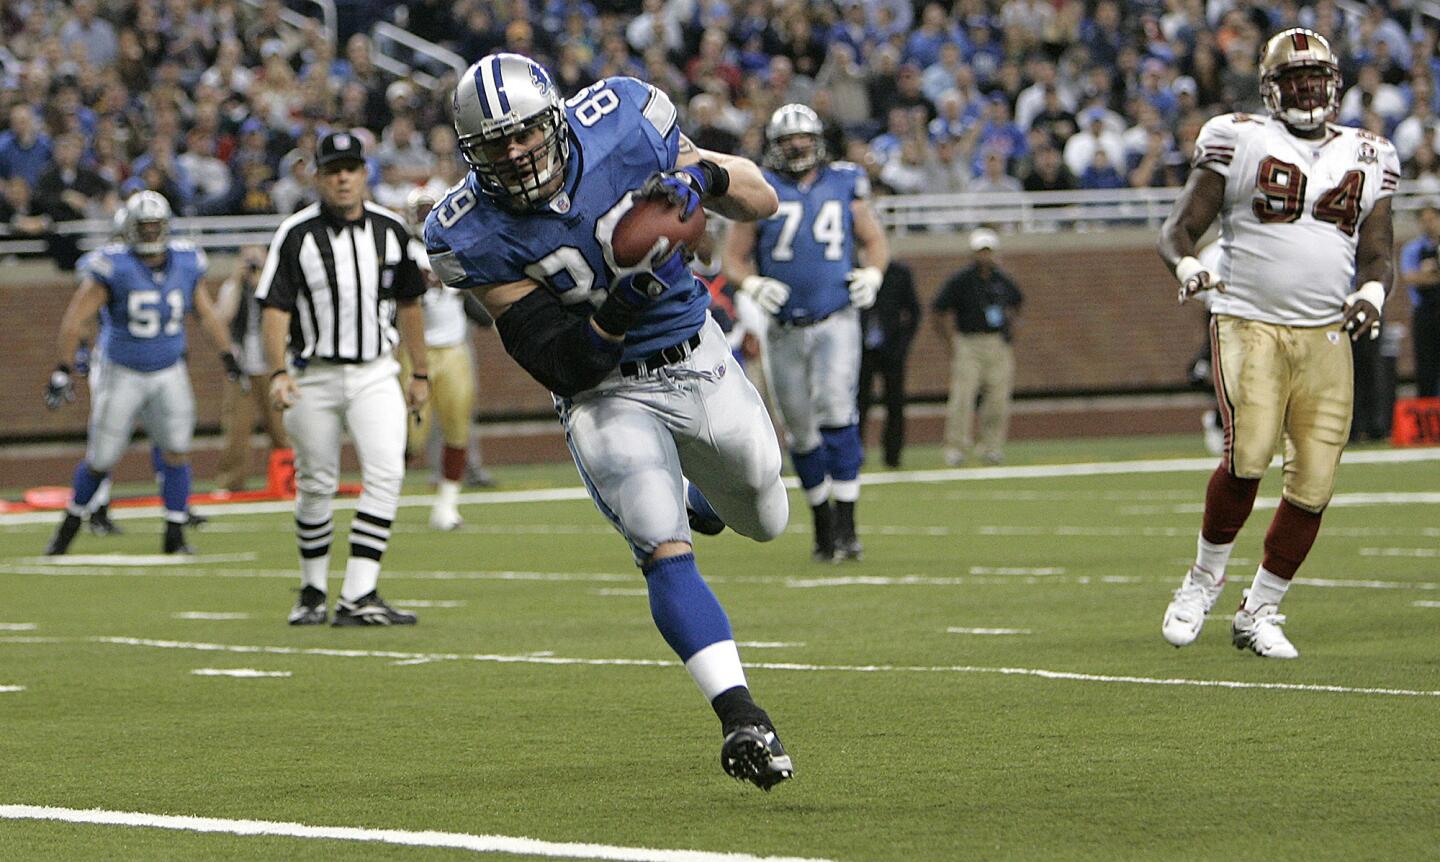 Detroit Lions tight end Dan Campbell catches an 8-yard touchdown pass against the San Francisco 49ers in the third quarter of an NFL football game in Detroit, Sunday, Nov. 12, 2006. San Francisco won 19-13. (AP Photo/Paul Sancya)